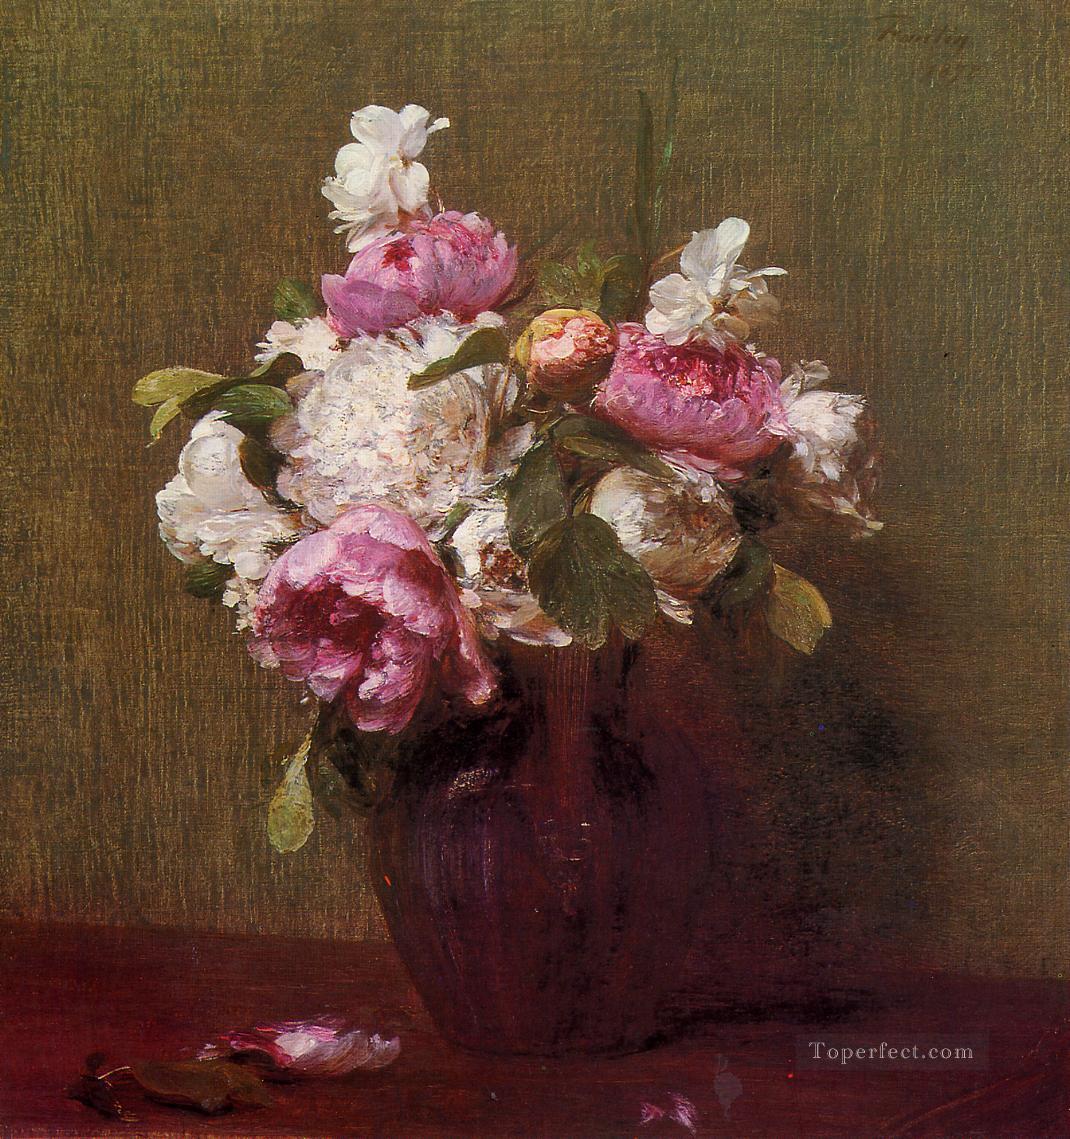 White Peonies and Roses Narcissus flower painter Henri Fantin Latour Oil Paintings